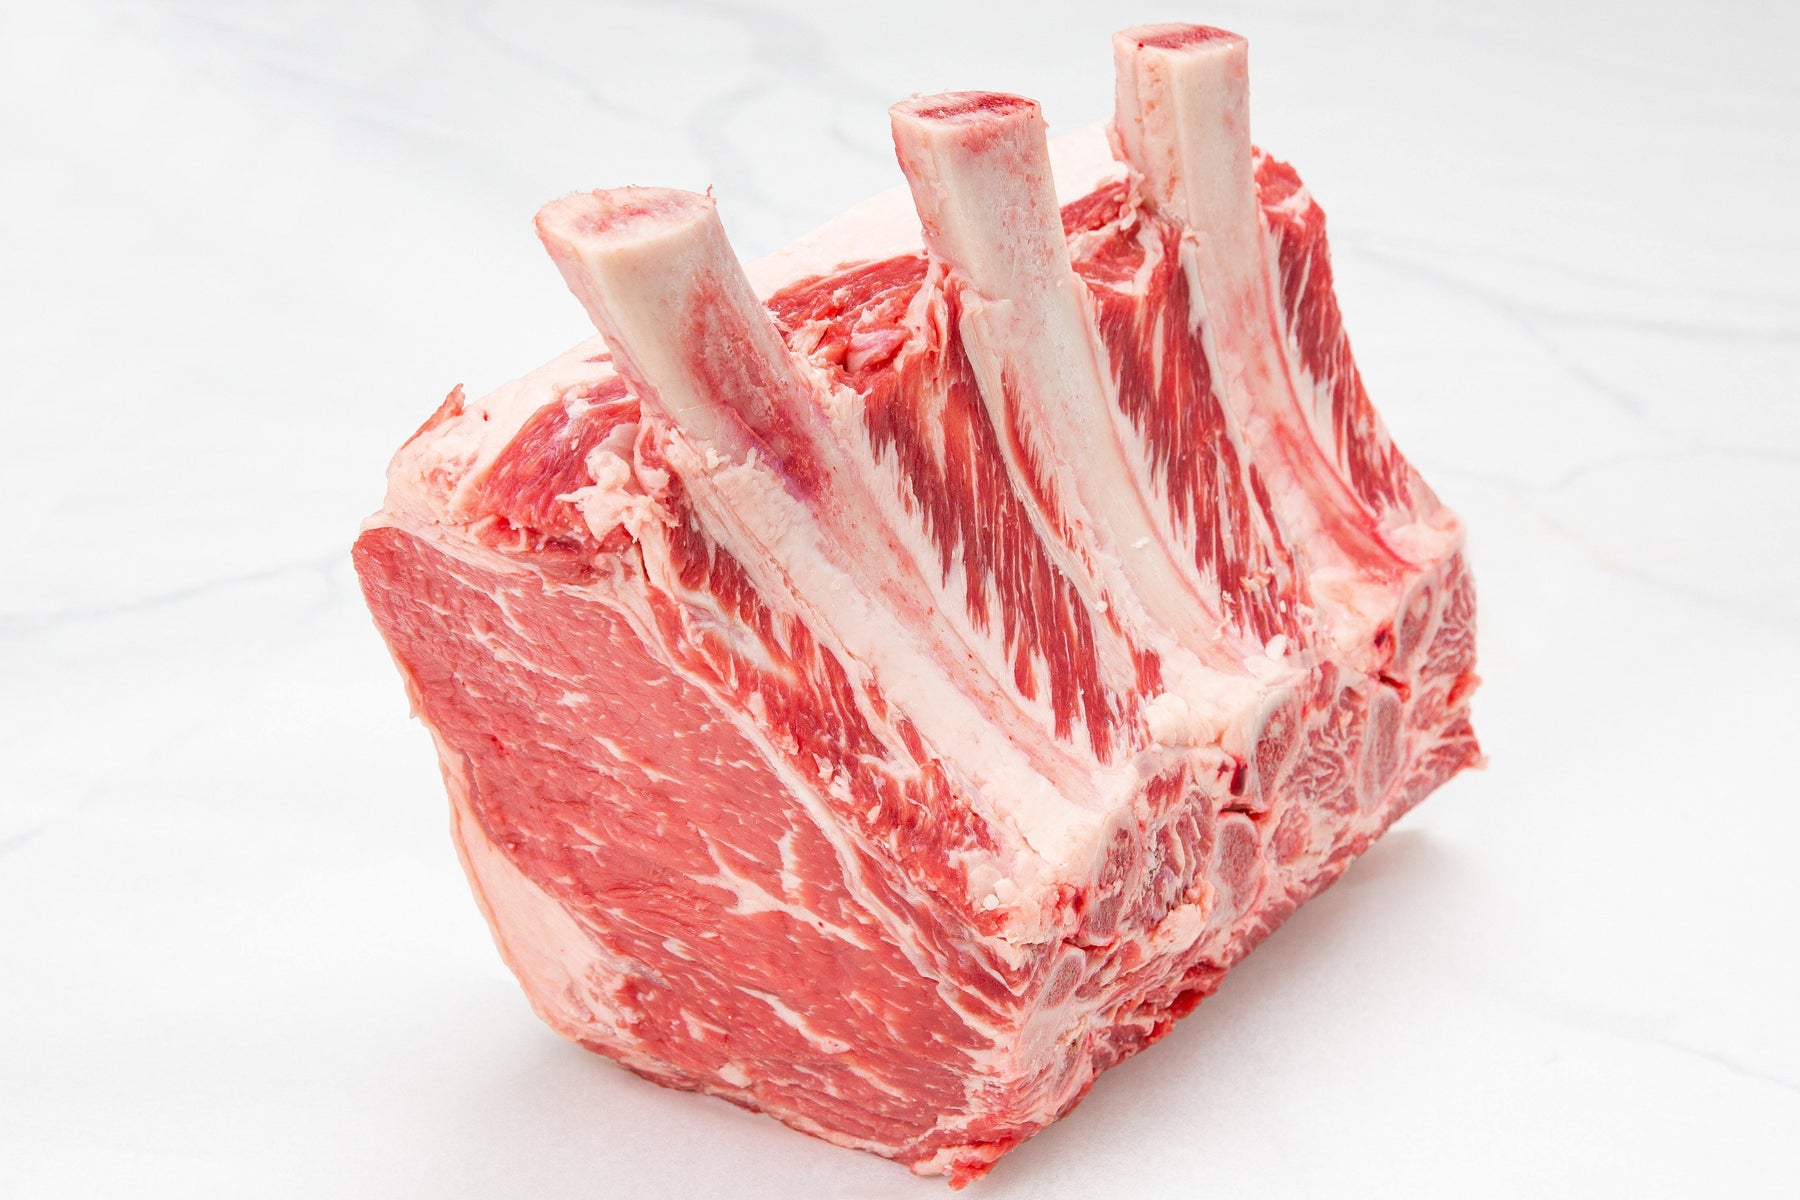 Dry Aged Prime Angus 14 Lb Rib Roast with Hand-crafted Carving Set &  Cutting Board